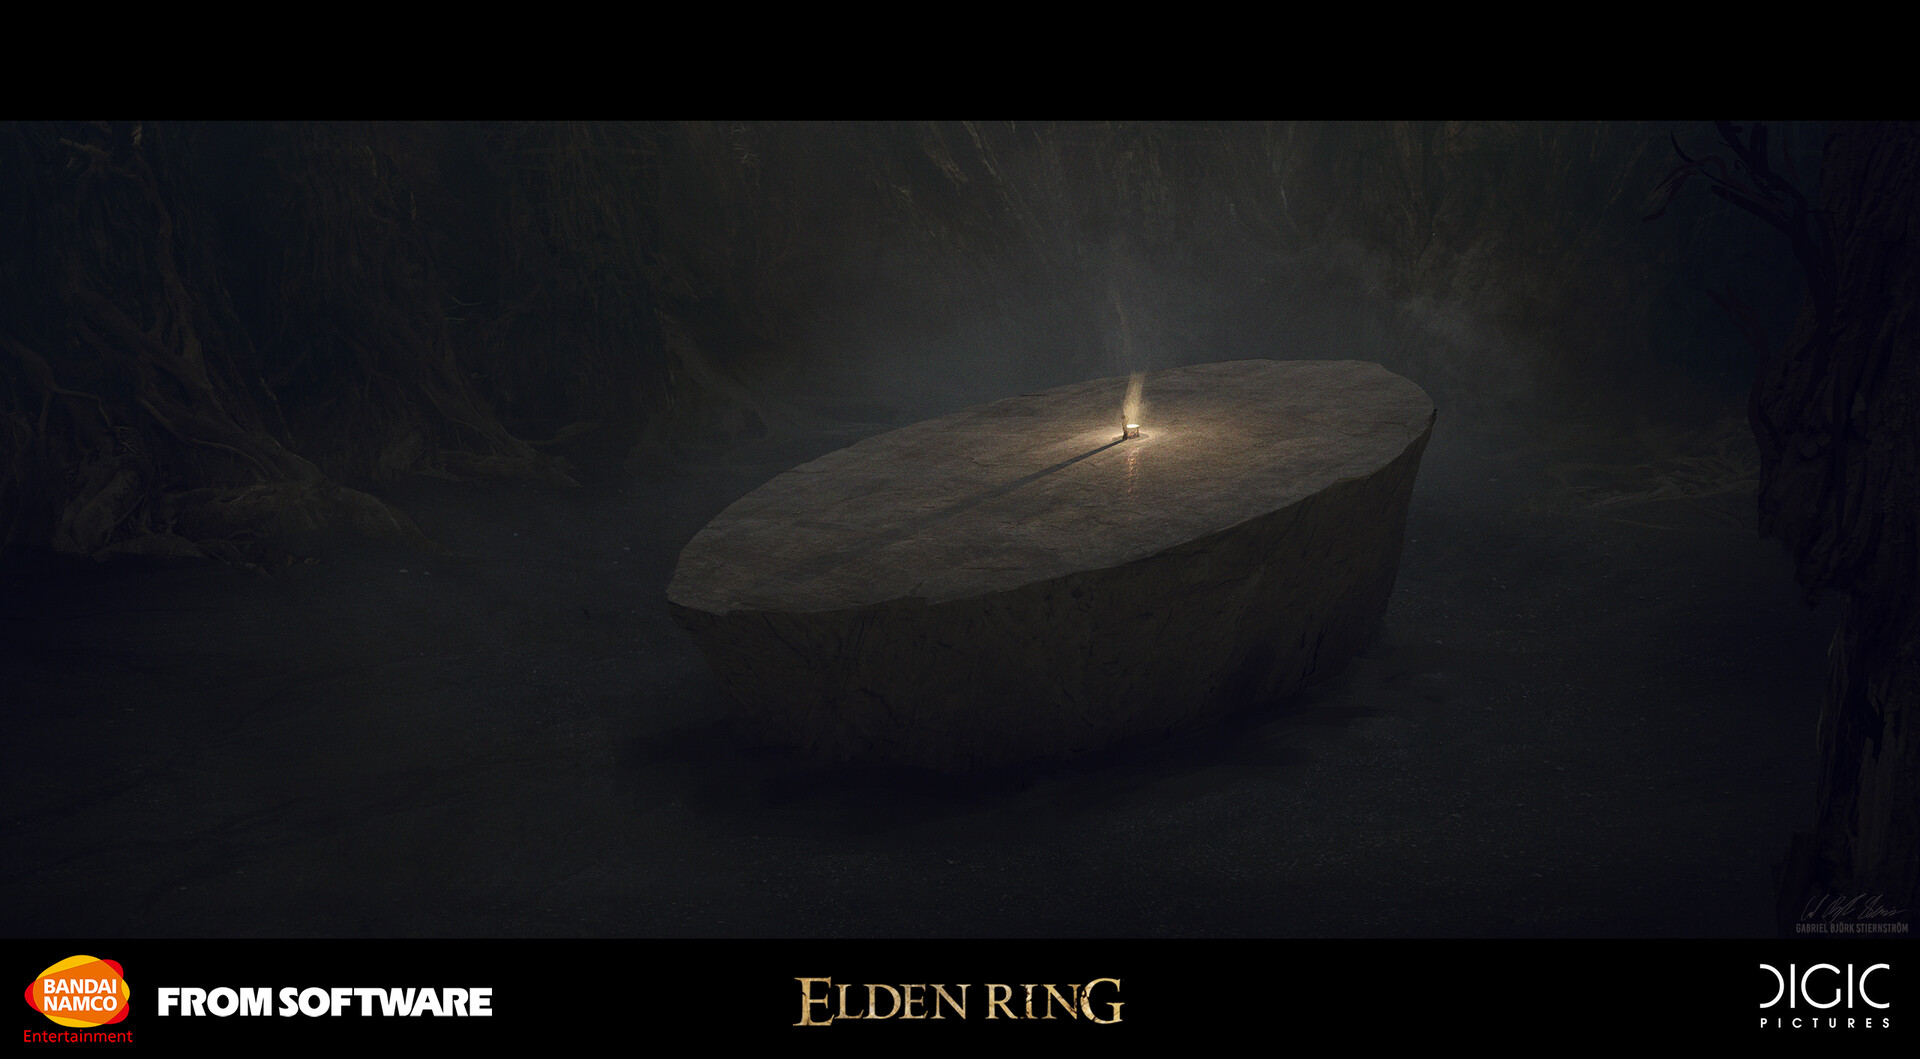 Five Elden Ring concept artwork with a mysterious character from the